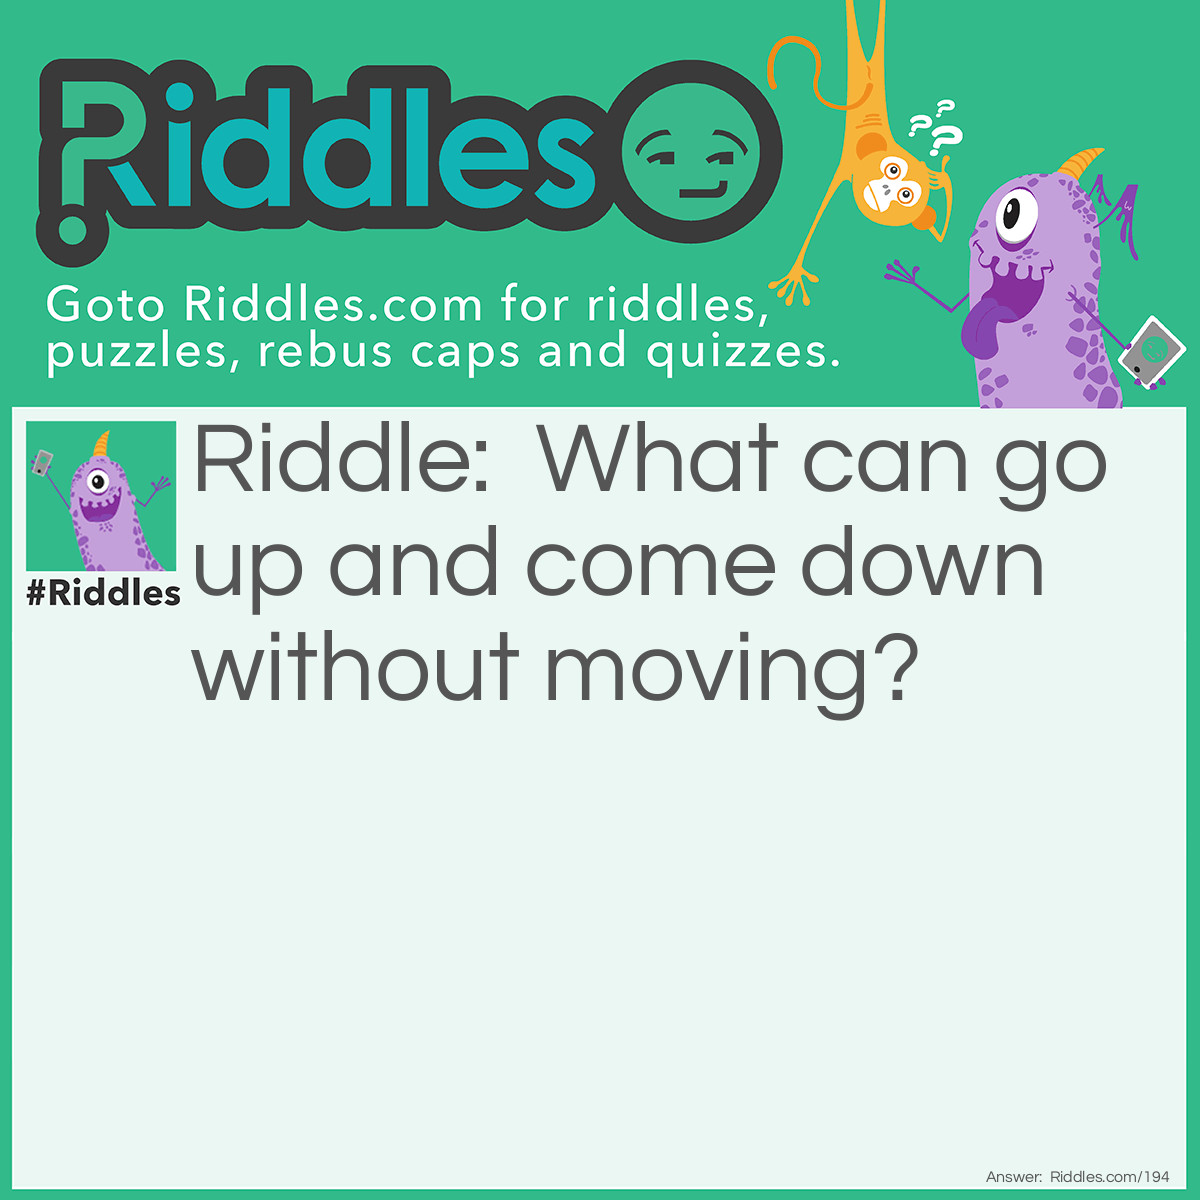 Riddle: What can go up and come down without moving? Answer: The temperature.